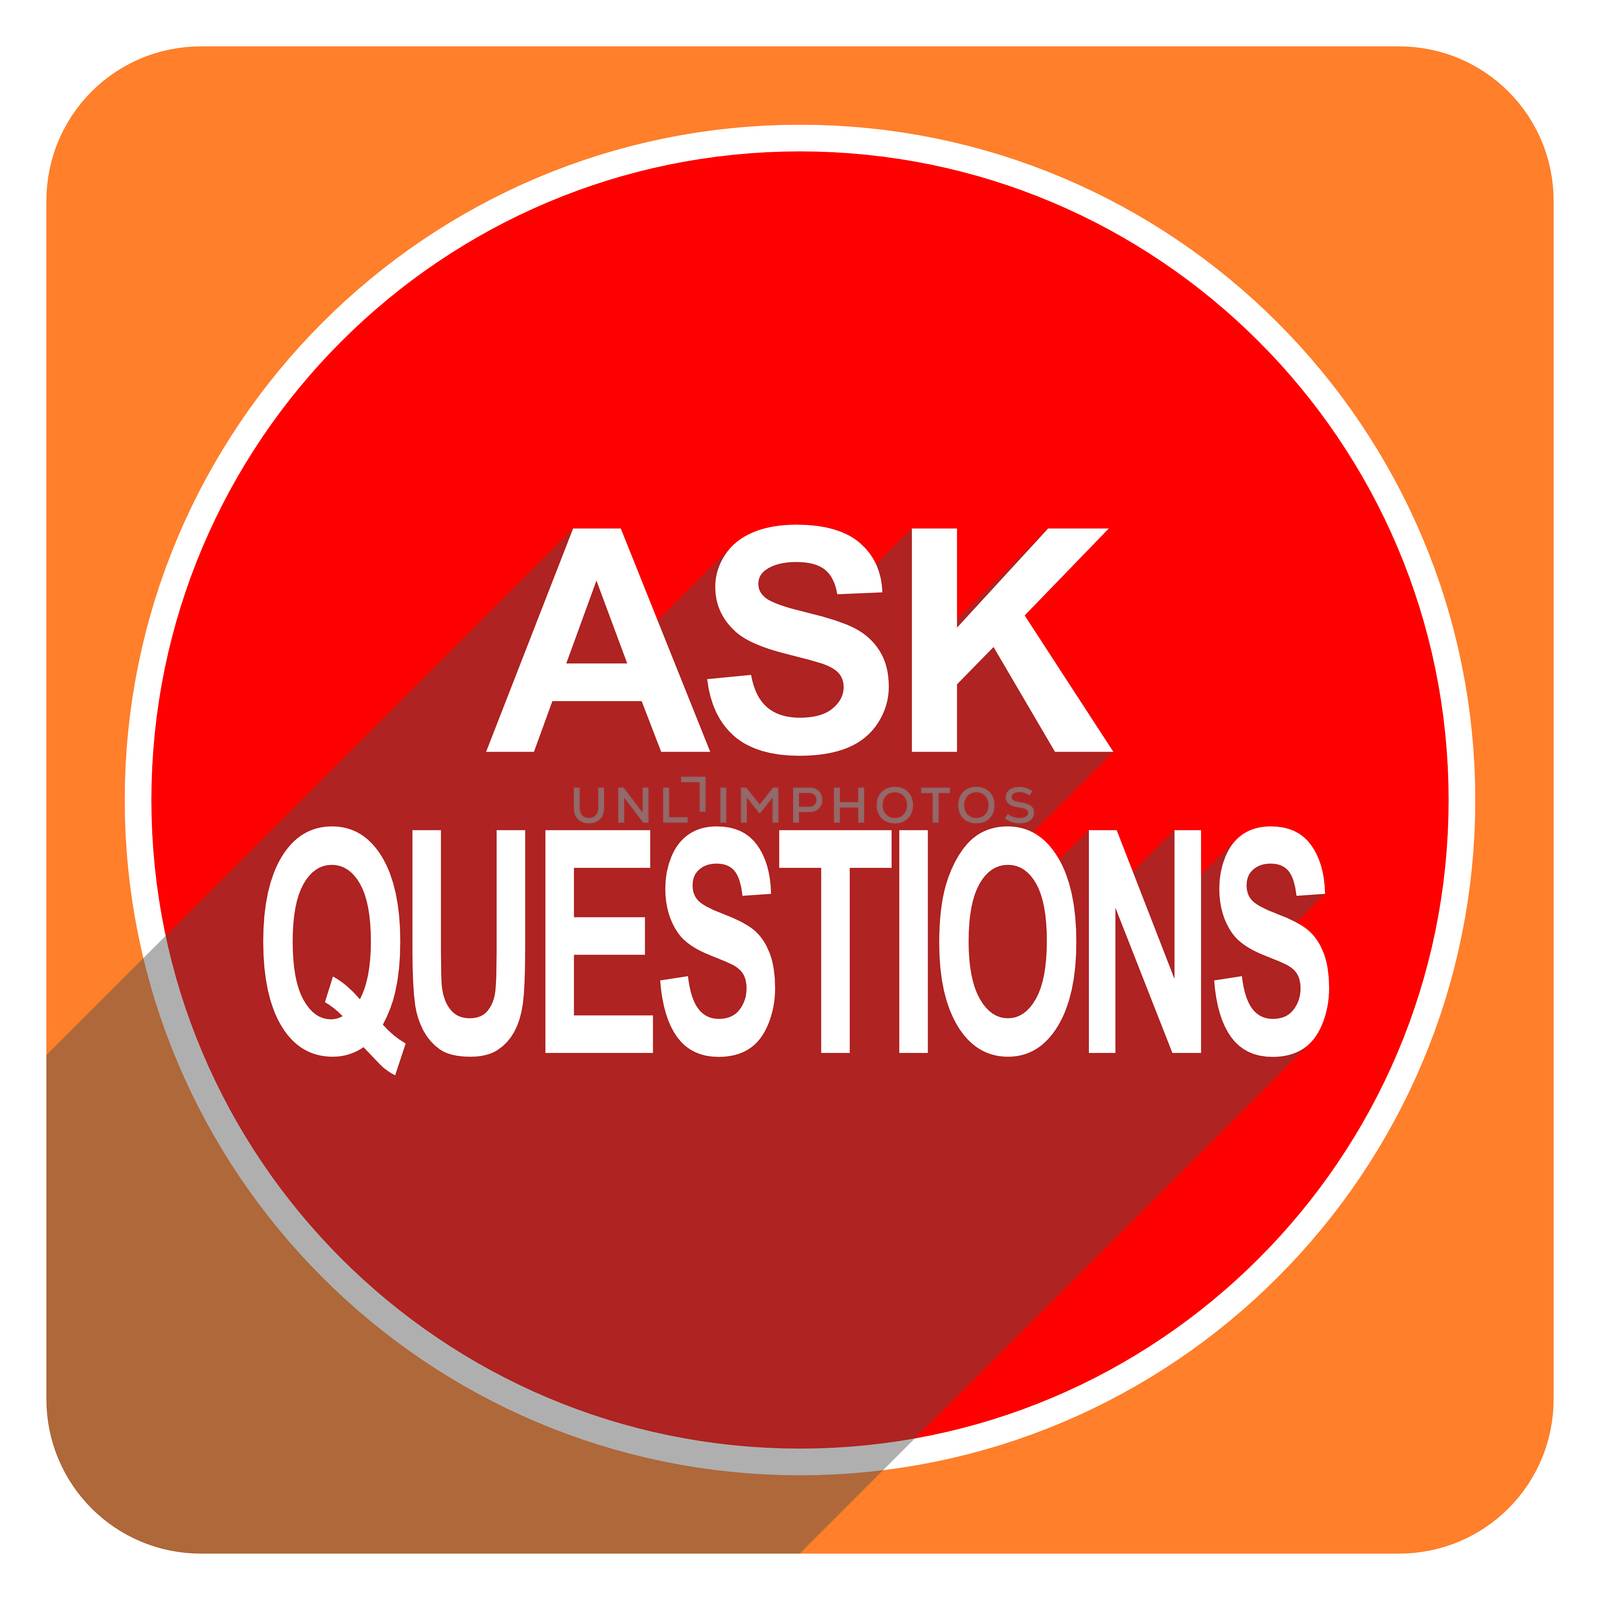 ask questions red flat icon isolated by alexwhite